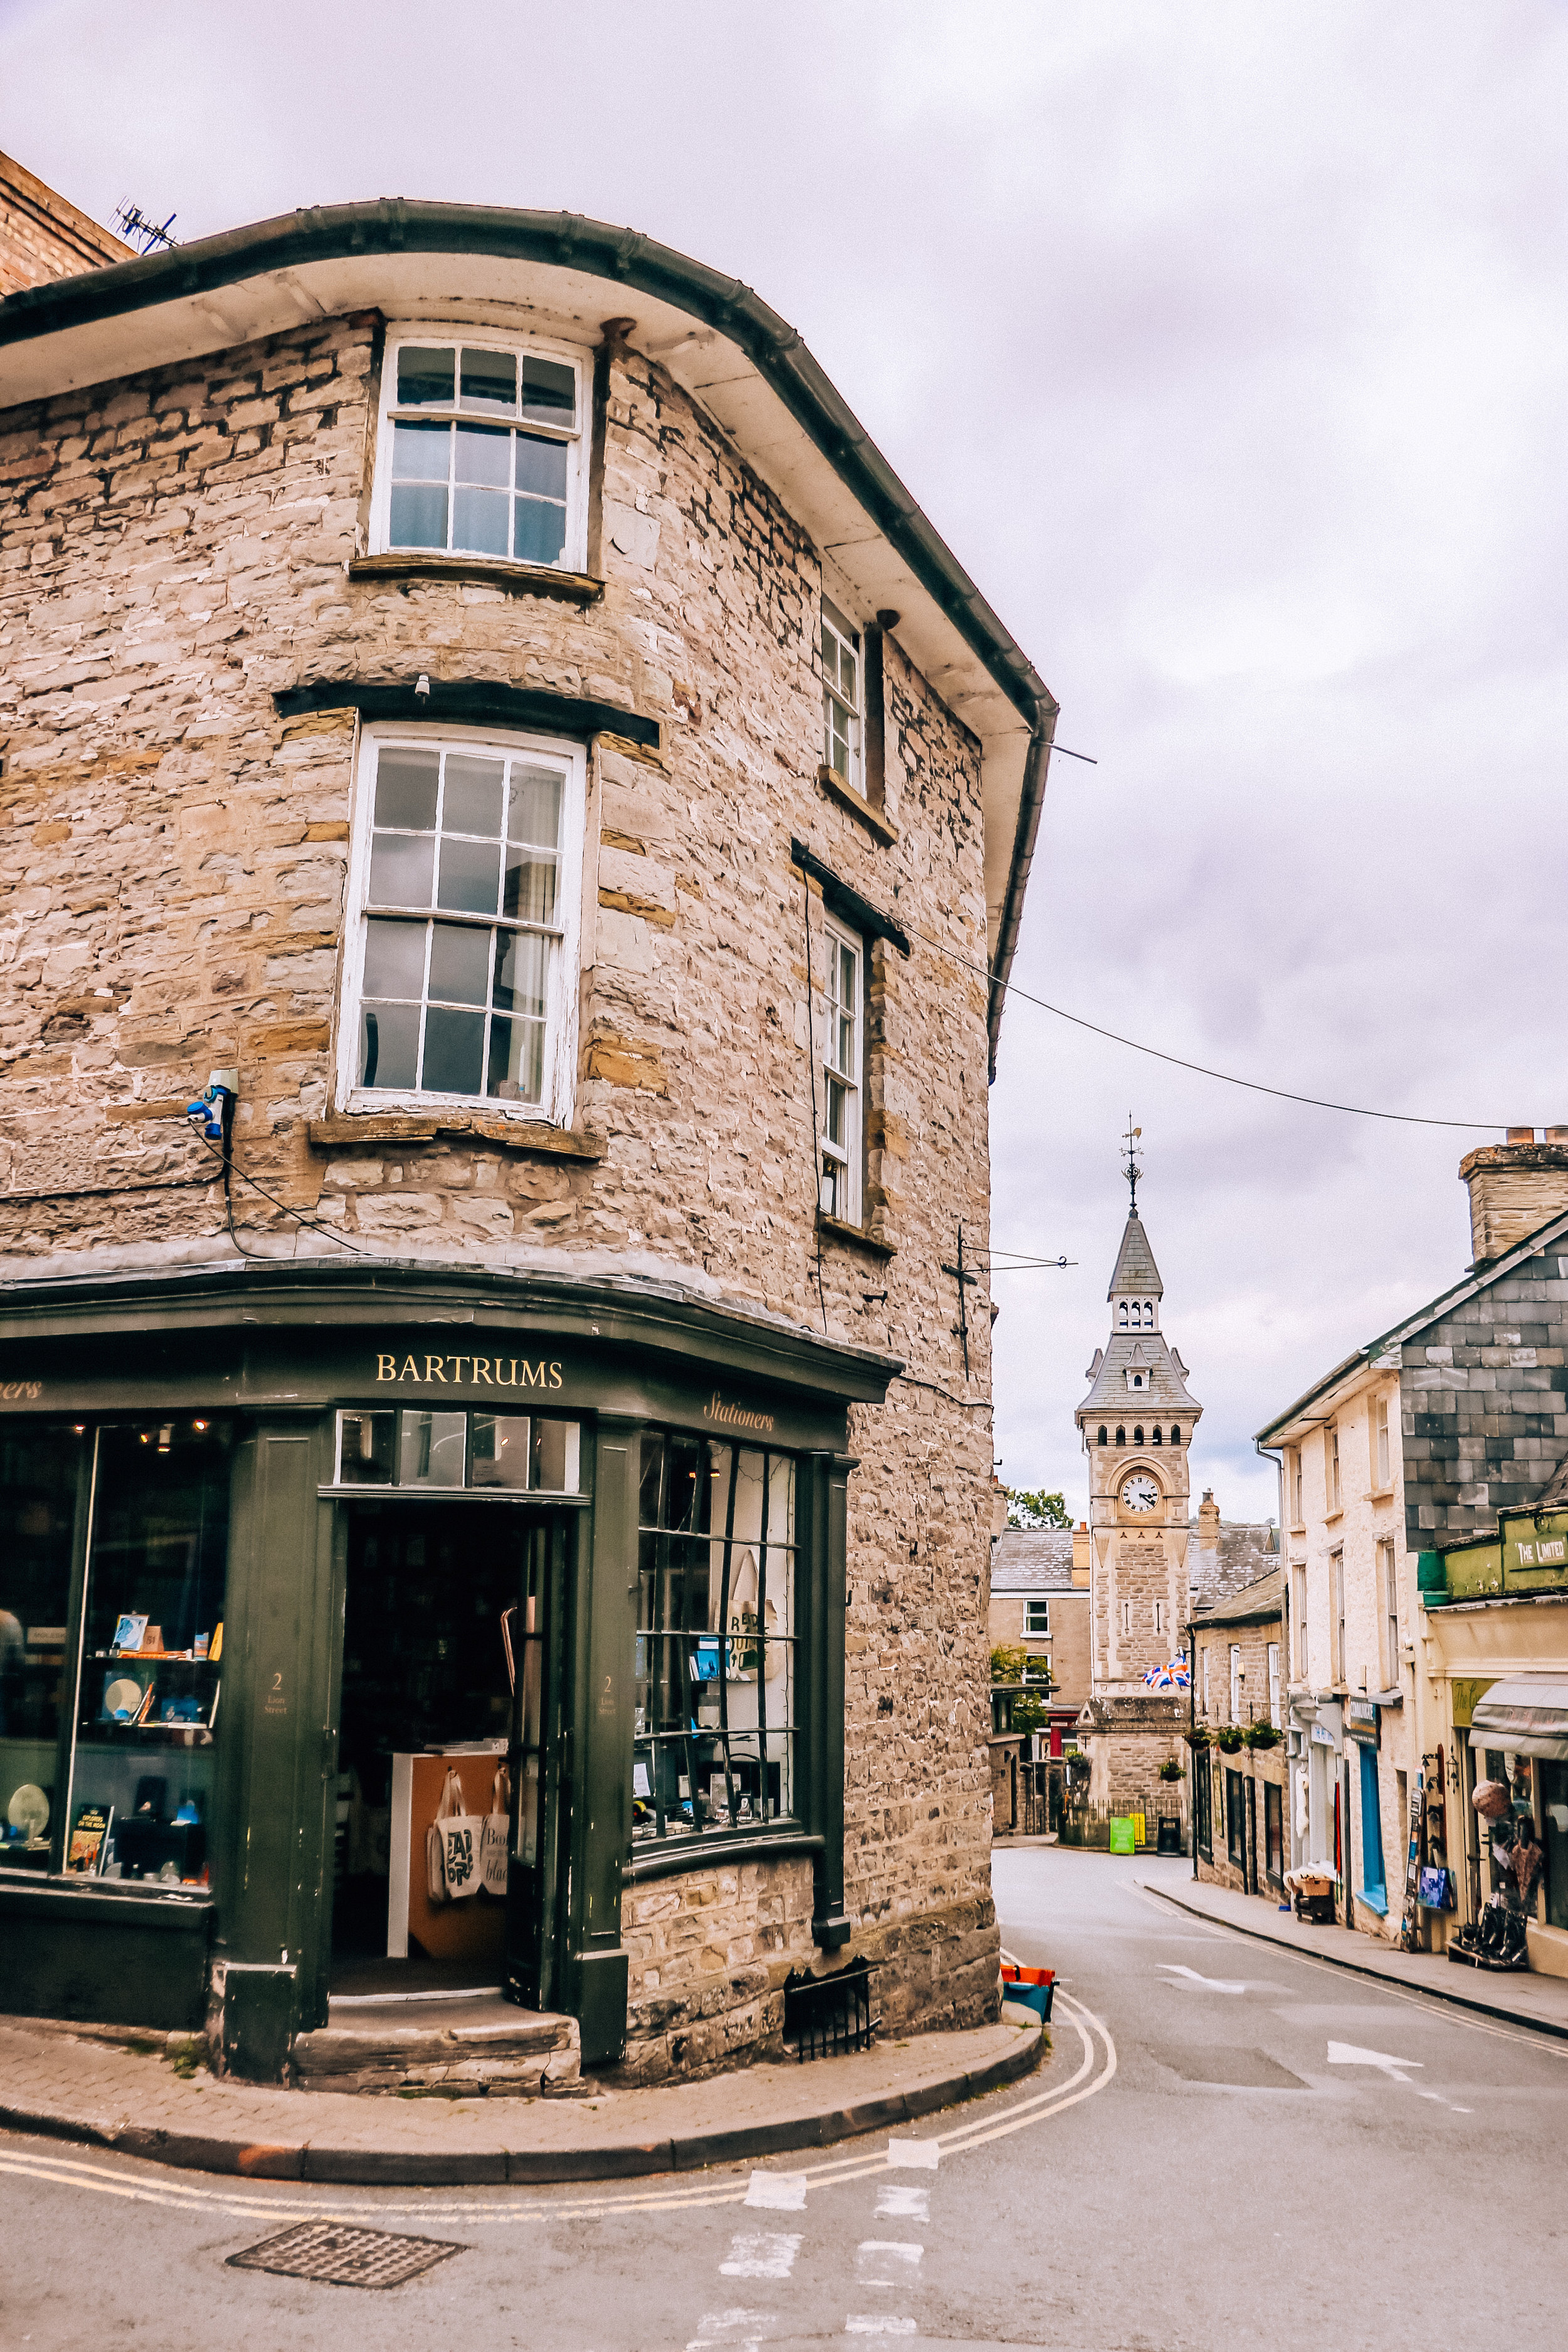 The must see places for a trip to Wales, bookstores in Hay-on-Wye